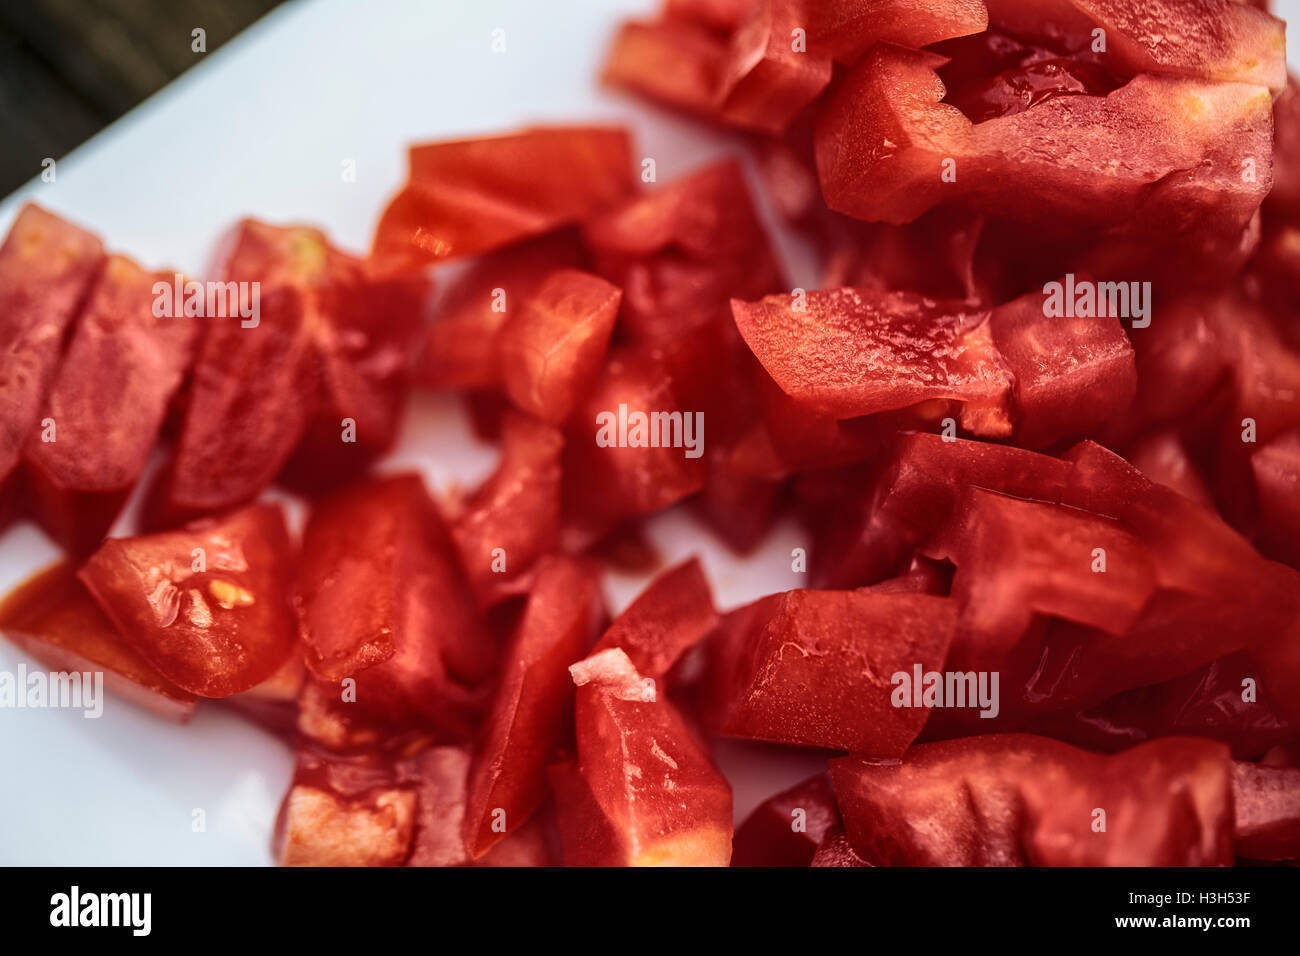 Close Up of Chopped pieces of ripe Tomato Stock Photo